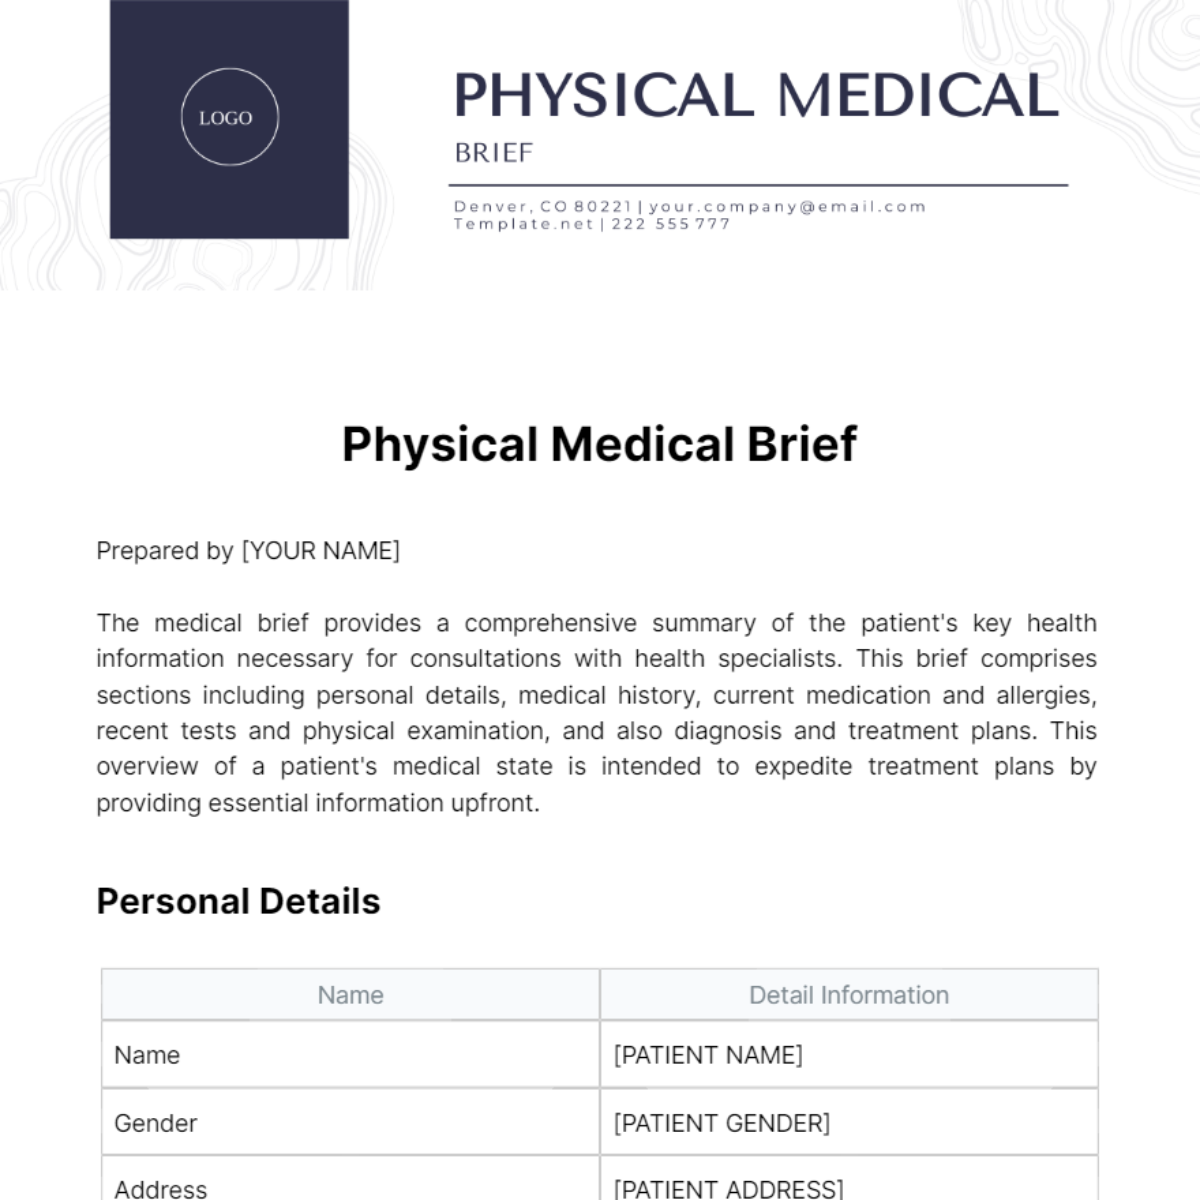 Free Physical Medical Brief Template